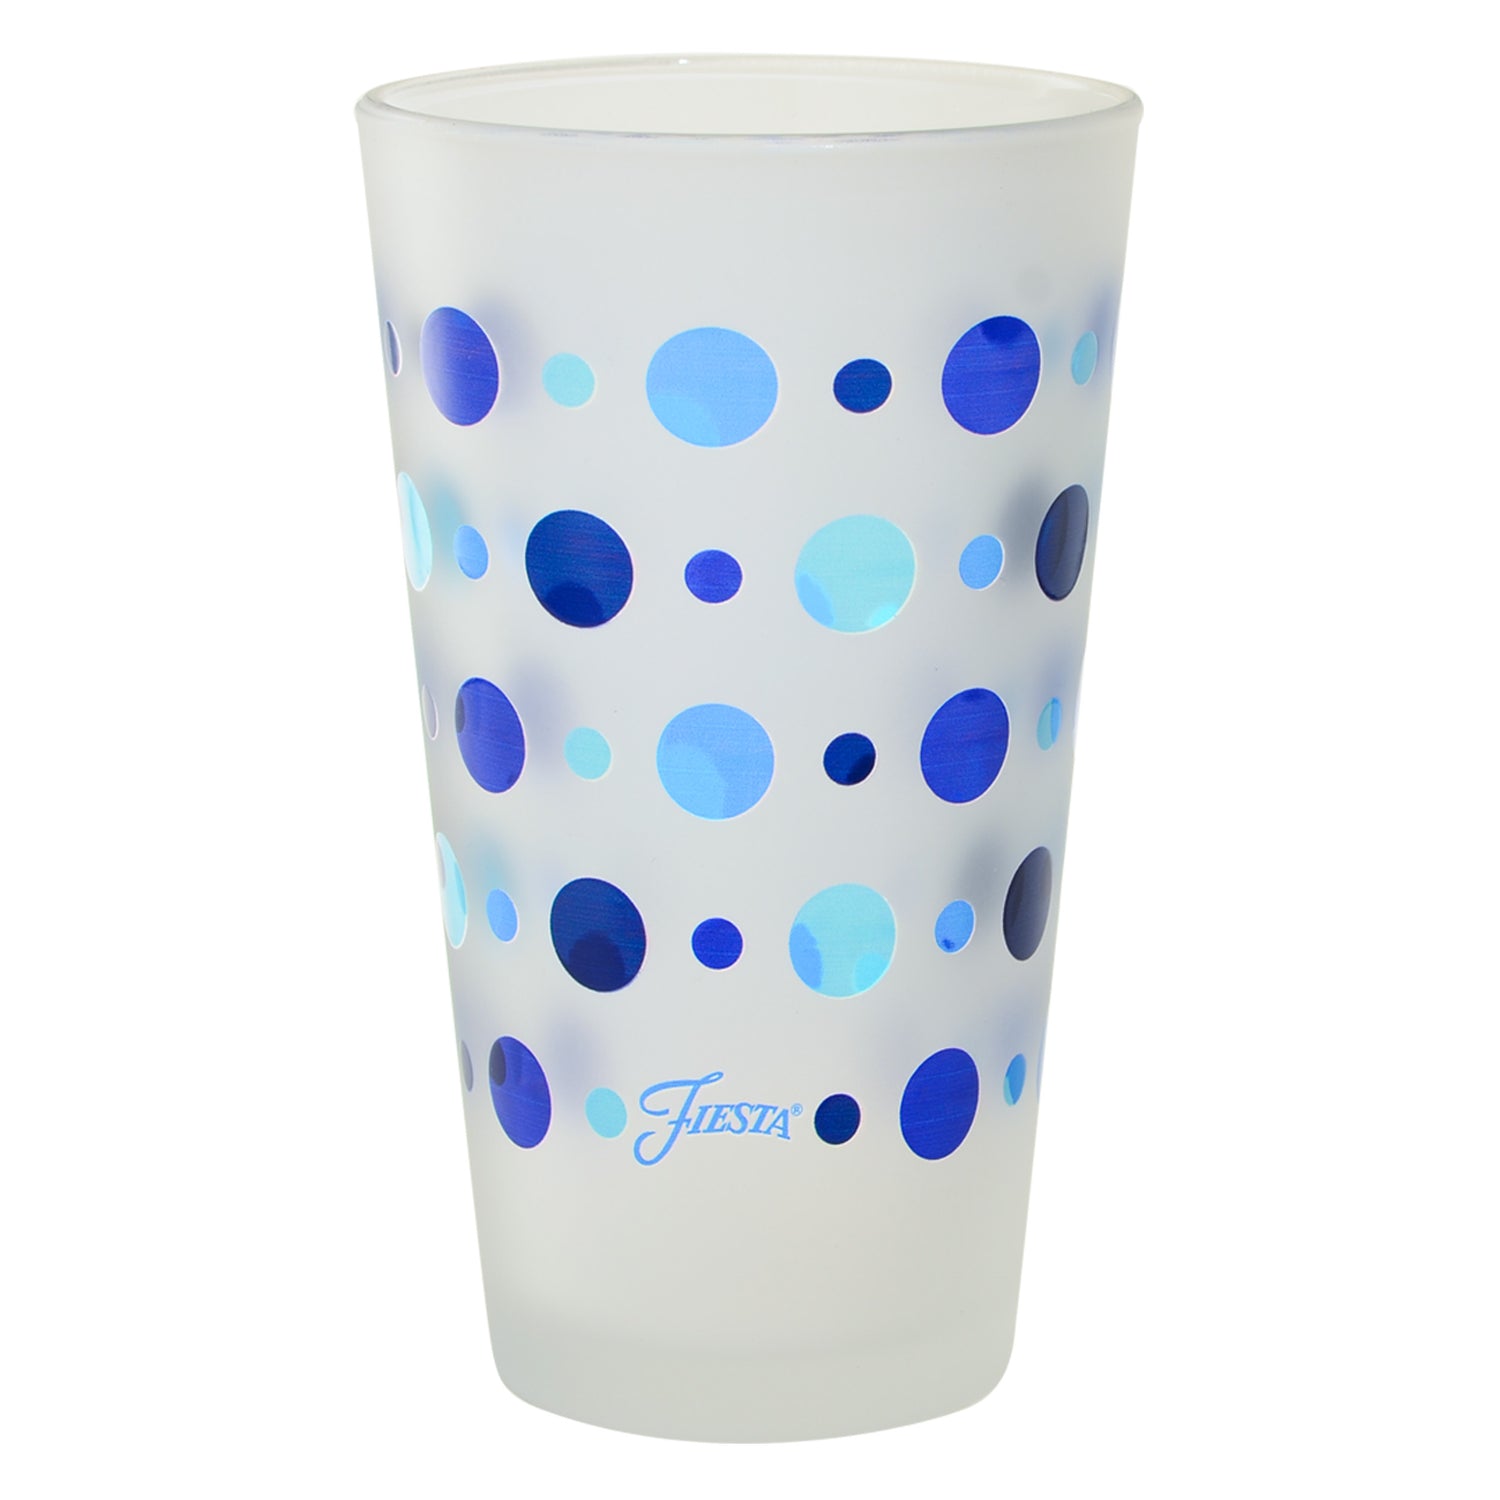 16 oz Highball Glasses with Frosted Design (Set of 4)